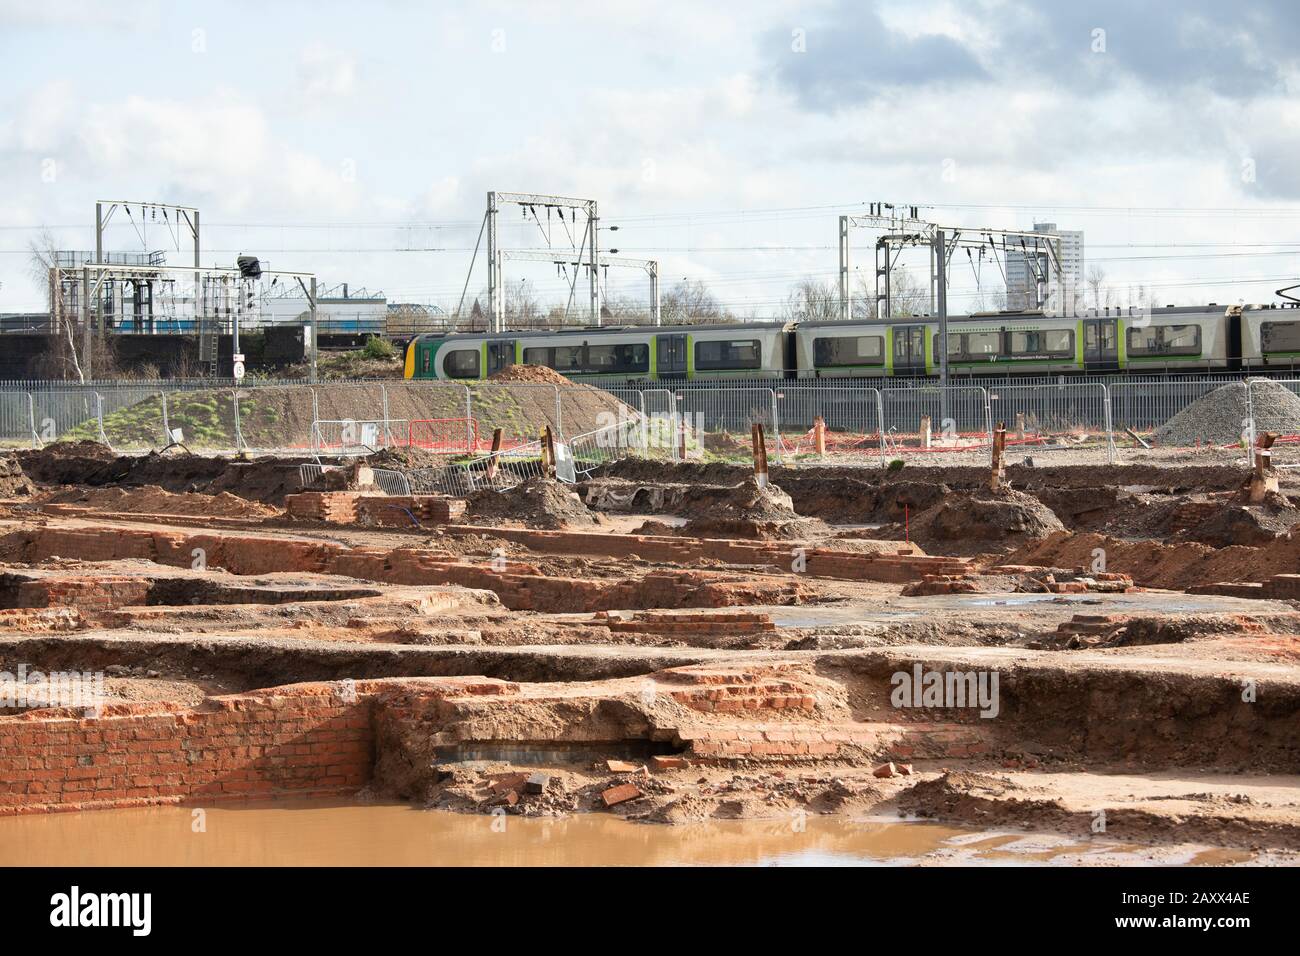 Building work starting on the HS2 rail project in Birmingham. The new Birmingham terminal building will be built around Curzon street taking in the old station building. Stock Photo